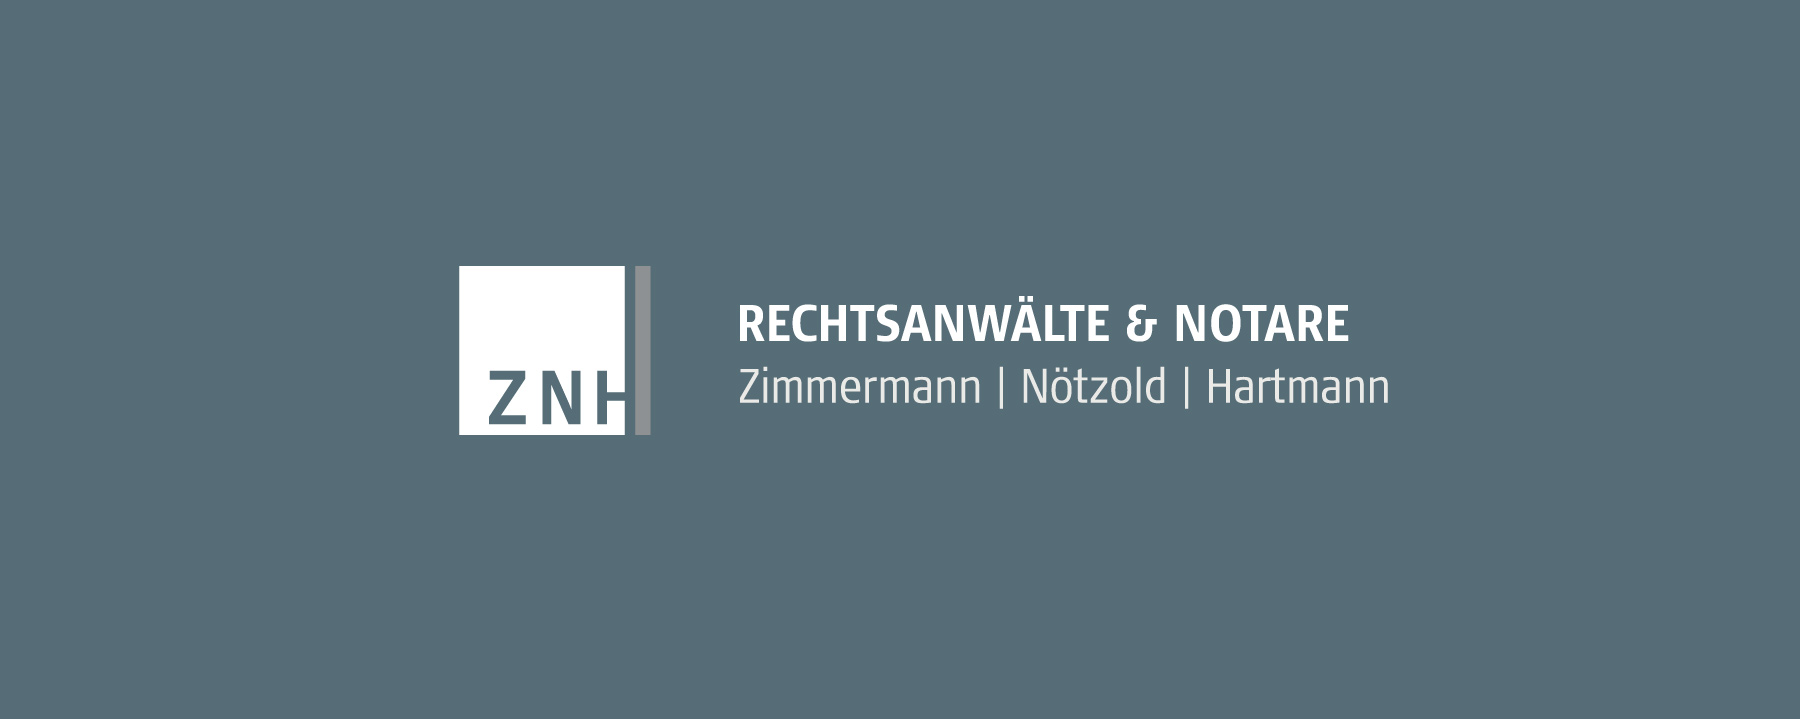 Logodesign ZNH Rechtsanwälte & Notare | Berlin | by Ilyas Susever